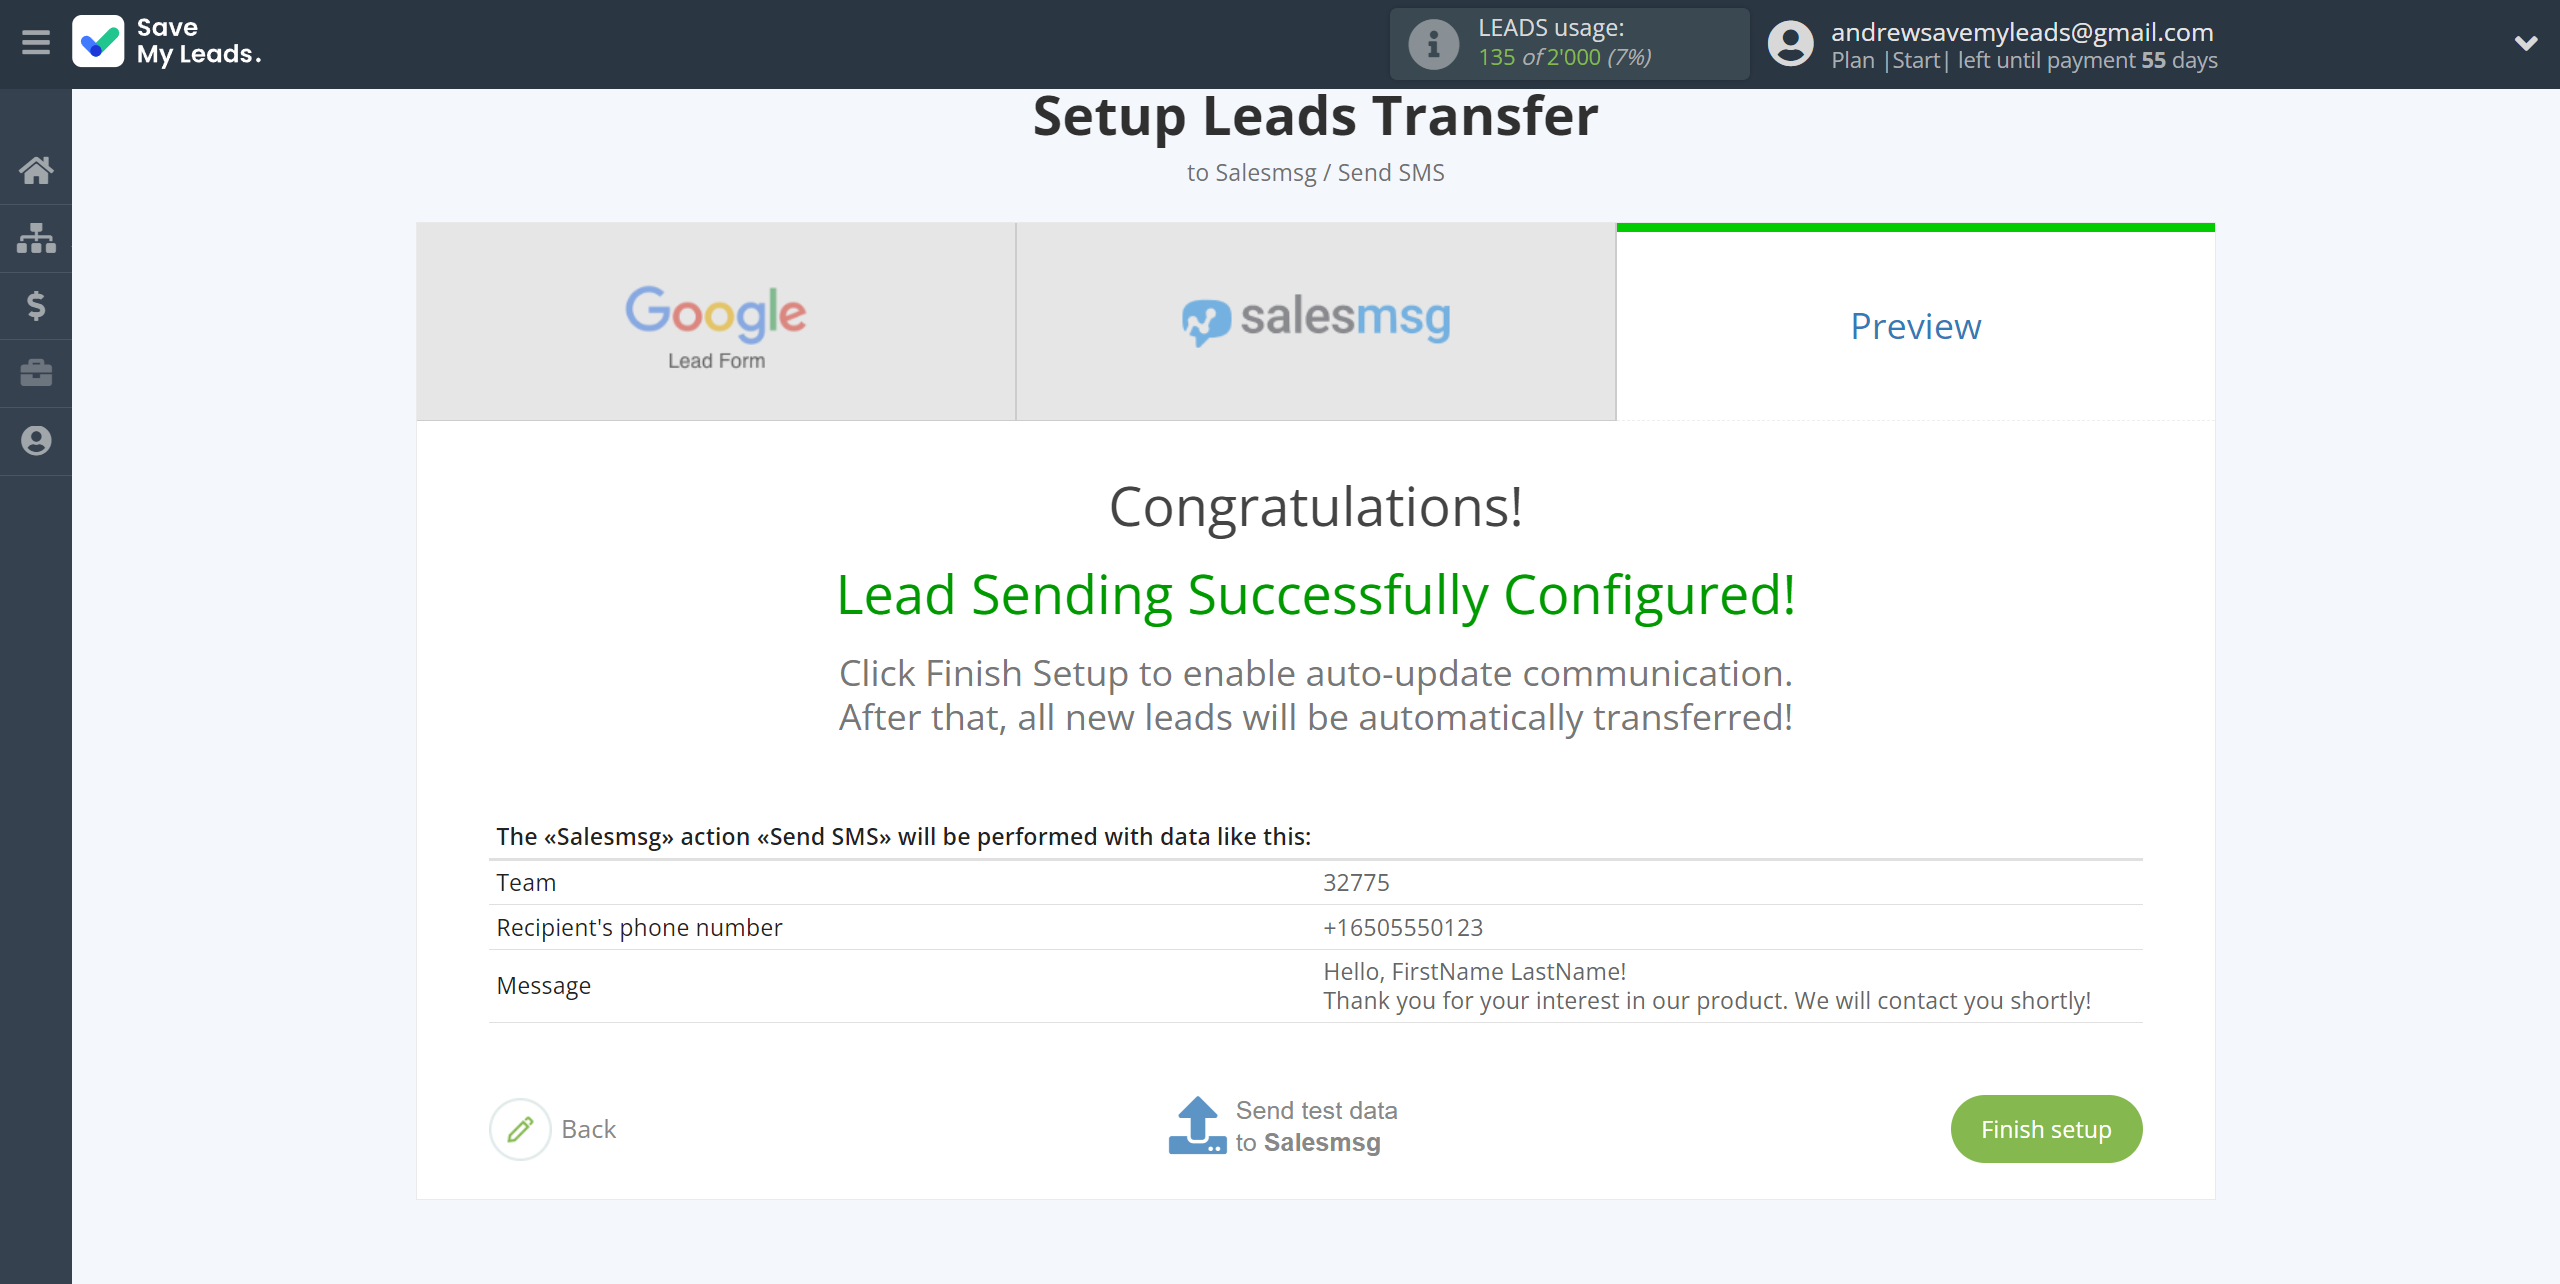 How to Connect Google Lead Form with Salesmsg | Test data